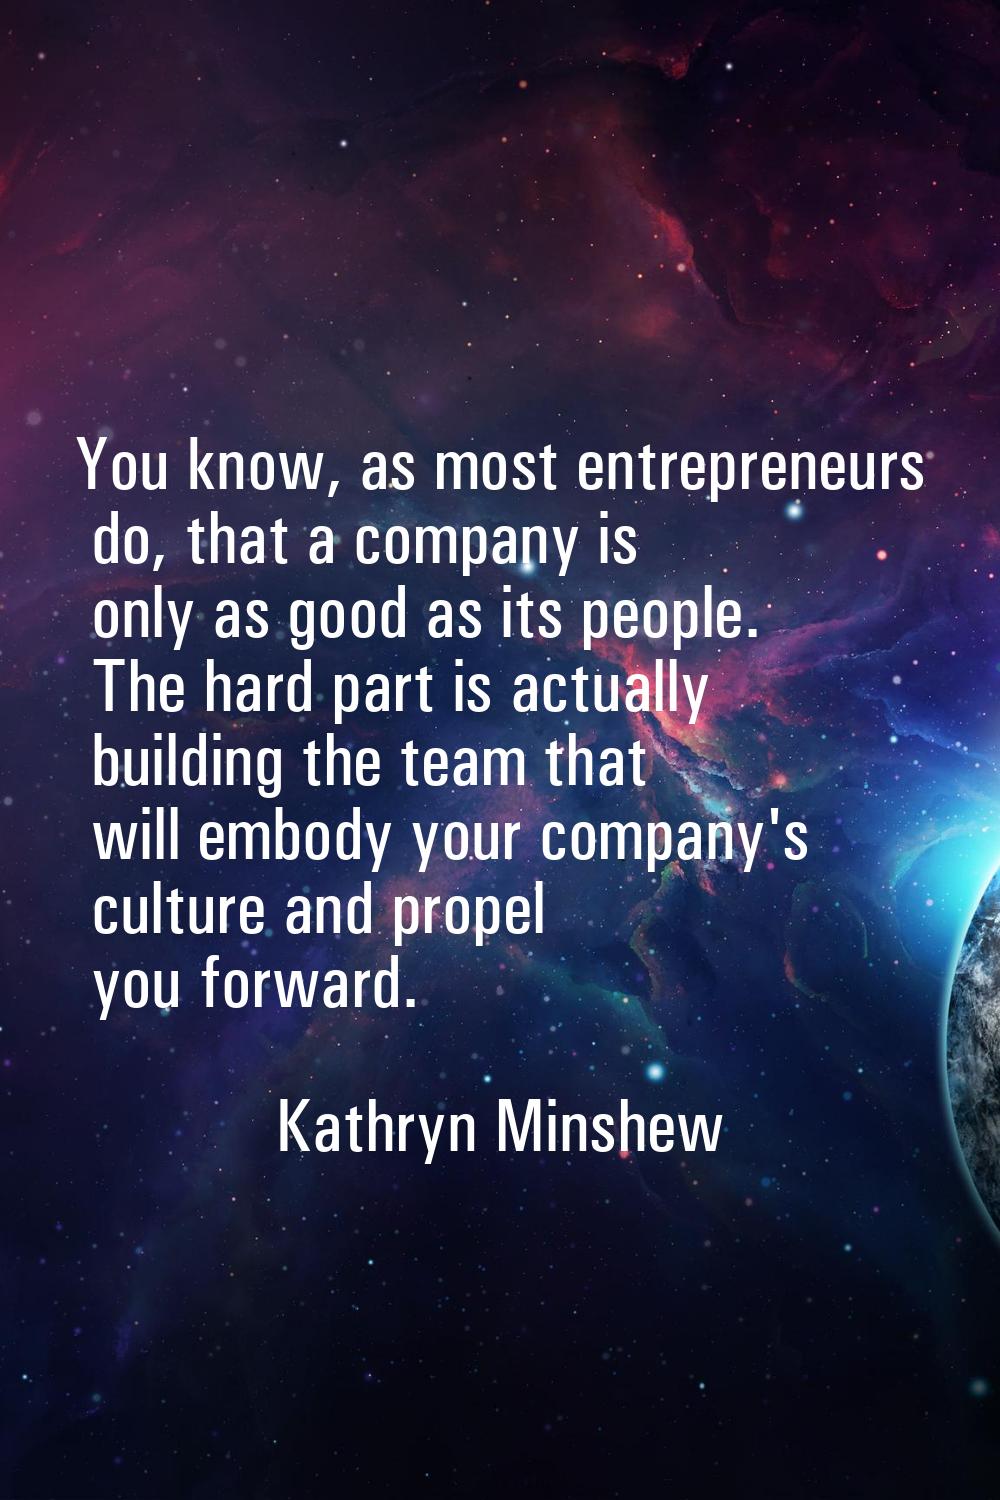 You know, as most entrepreneurs do, that a company is only as good as its people. The hard part is 